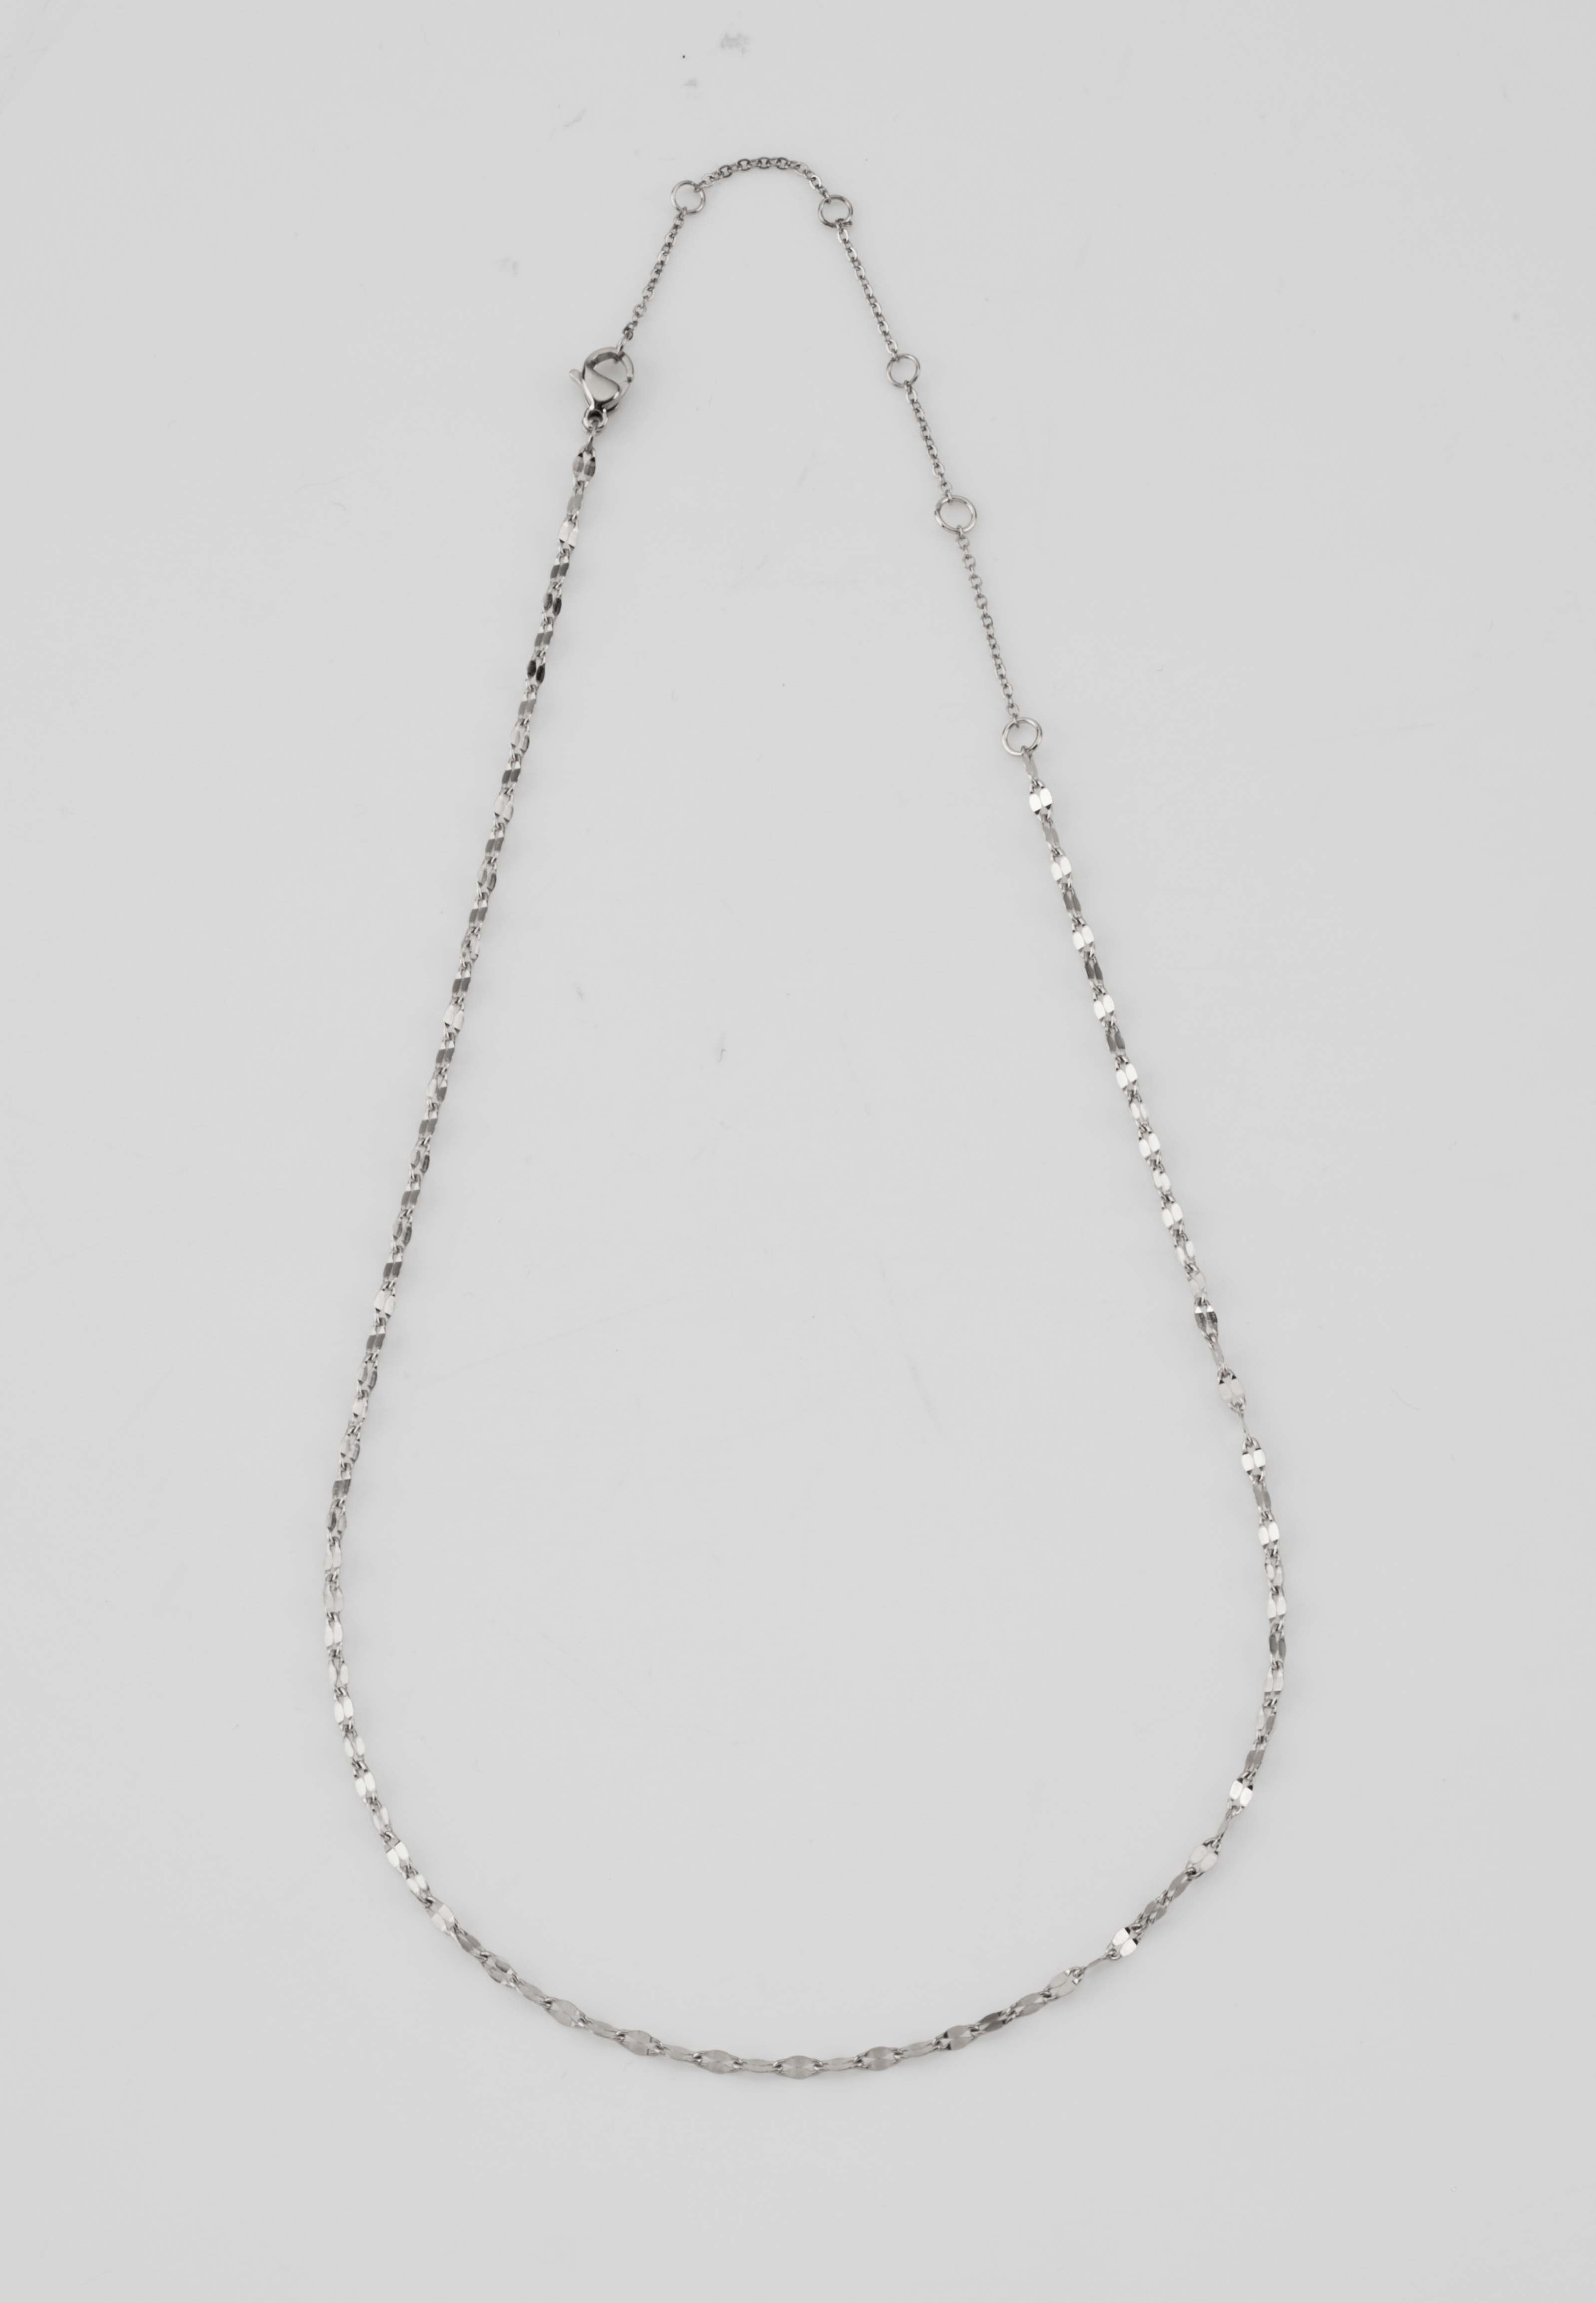 Chanel - Silver Necklace - Ocean Wave Jewelry